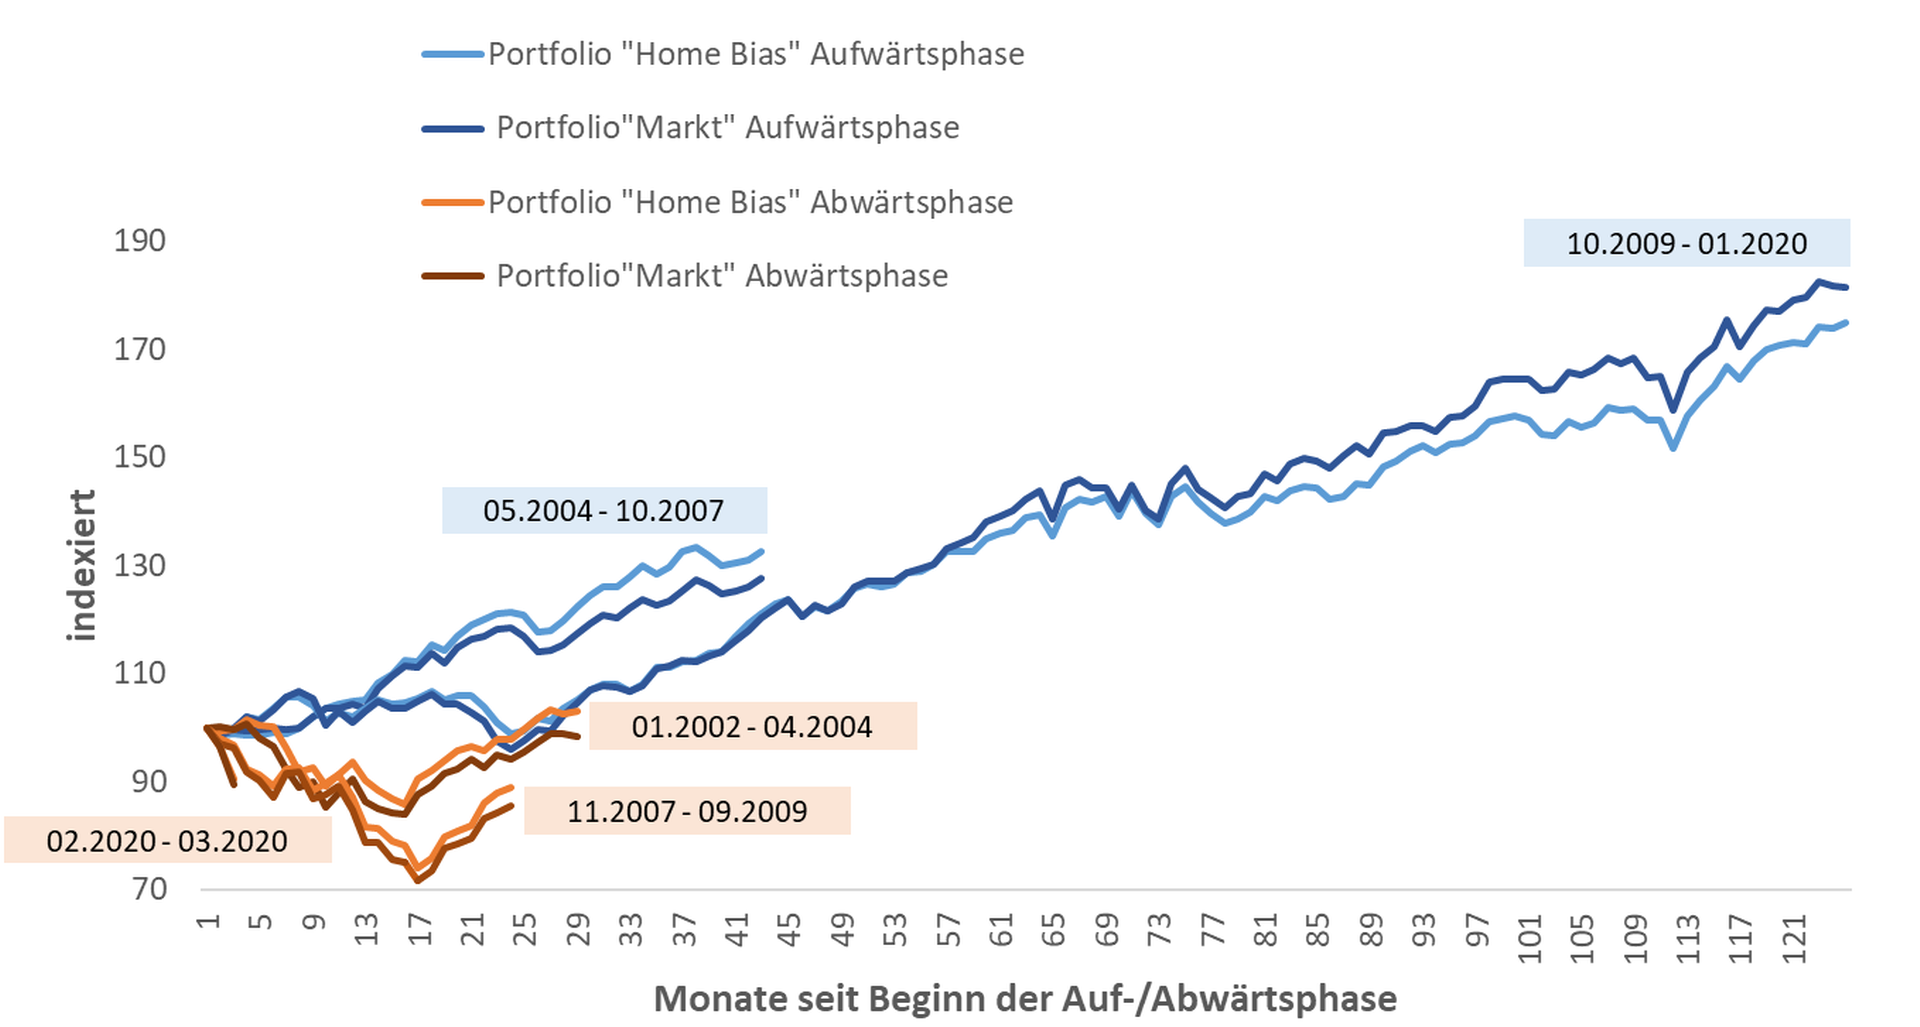 Yield performance of portfolio with and without home bias